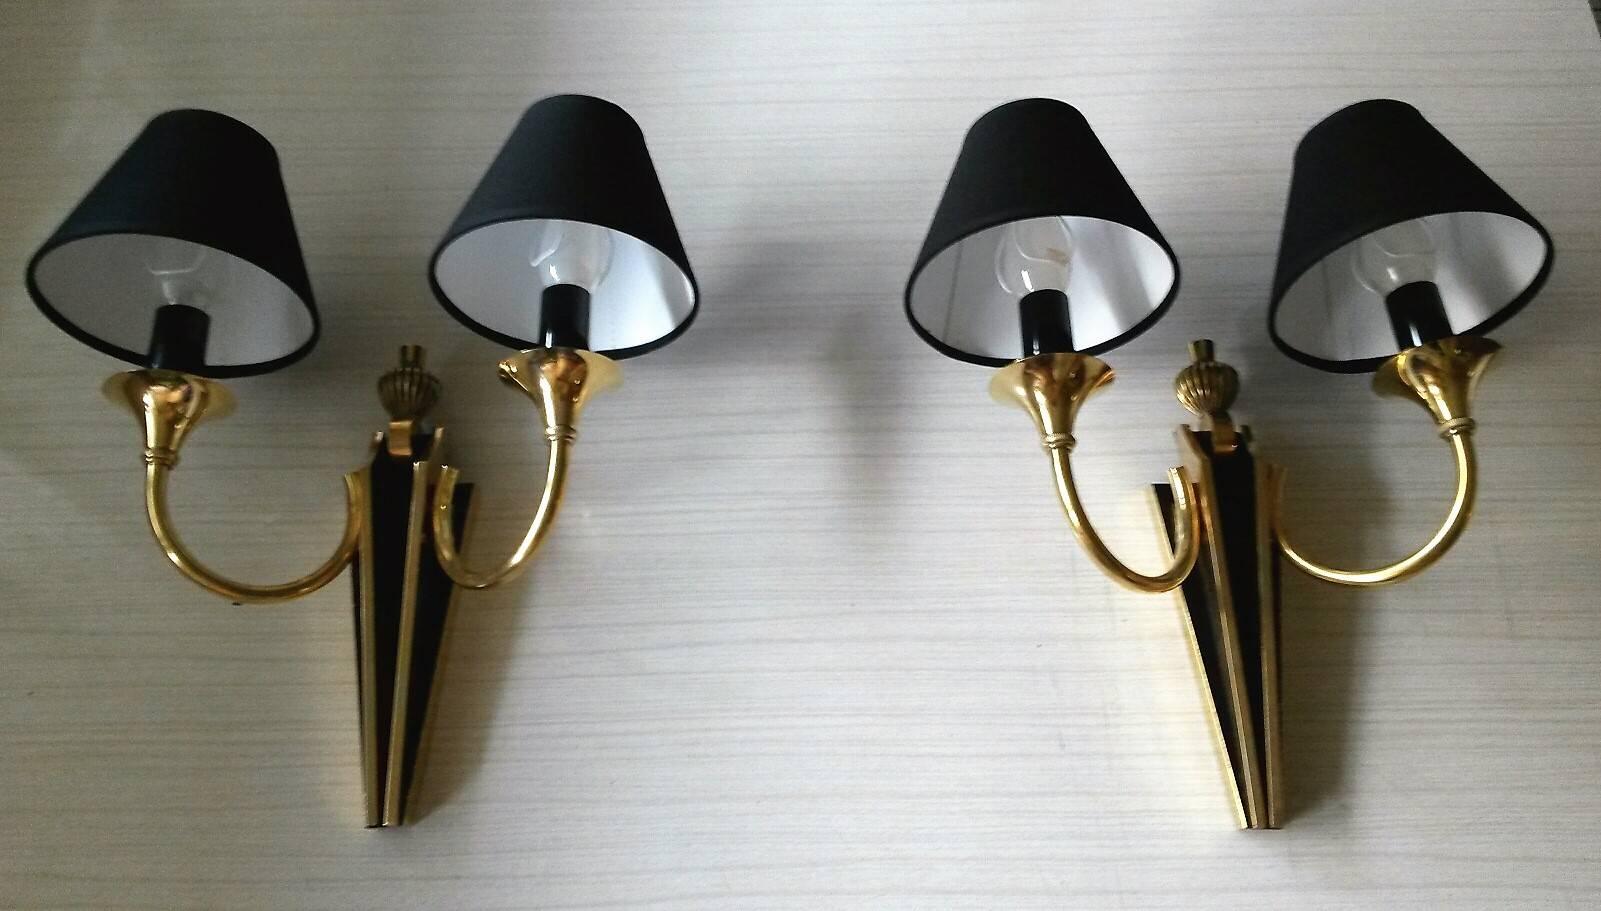 Stunning French Neoclassical Style Pair of Two-Arm Sconces by Maison Jansen 1